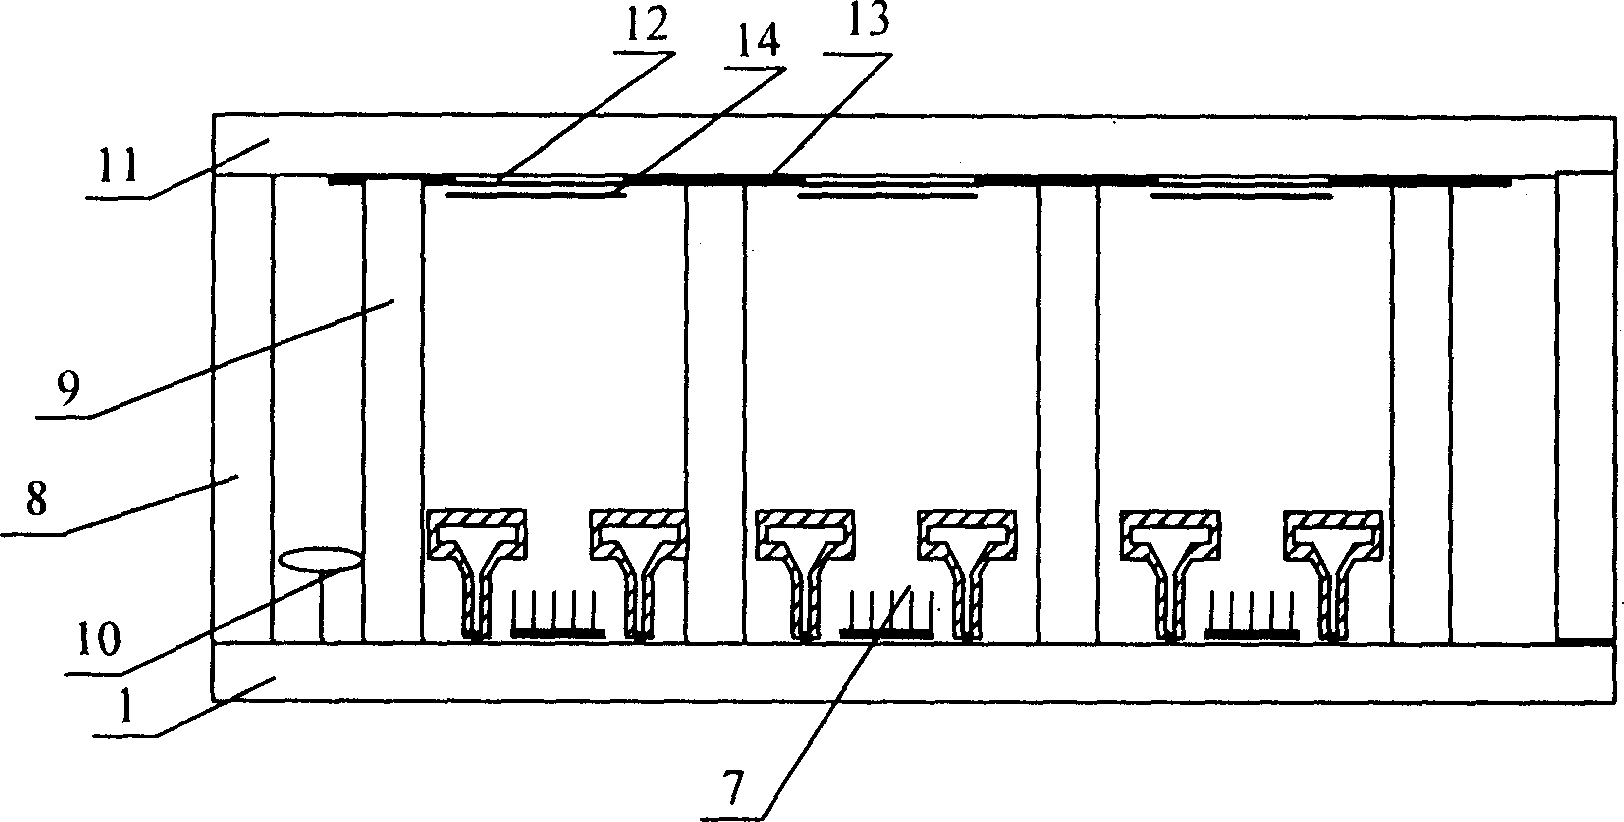 Pland display having umbrella-shaped grid array structure and its manufacturing technology